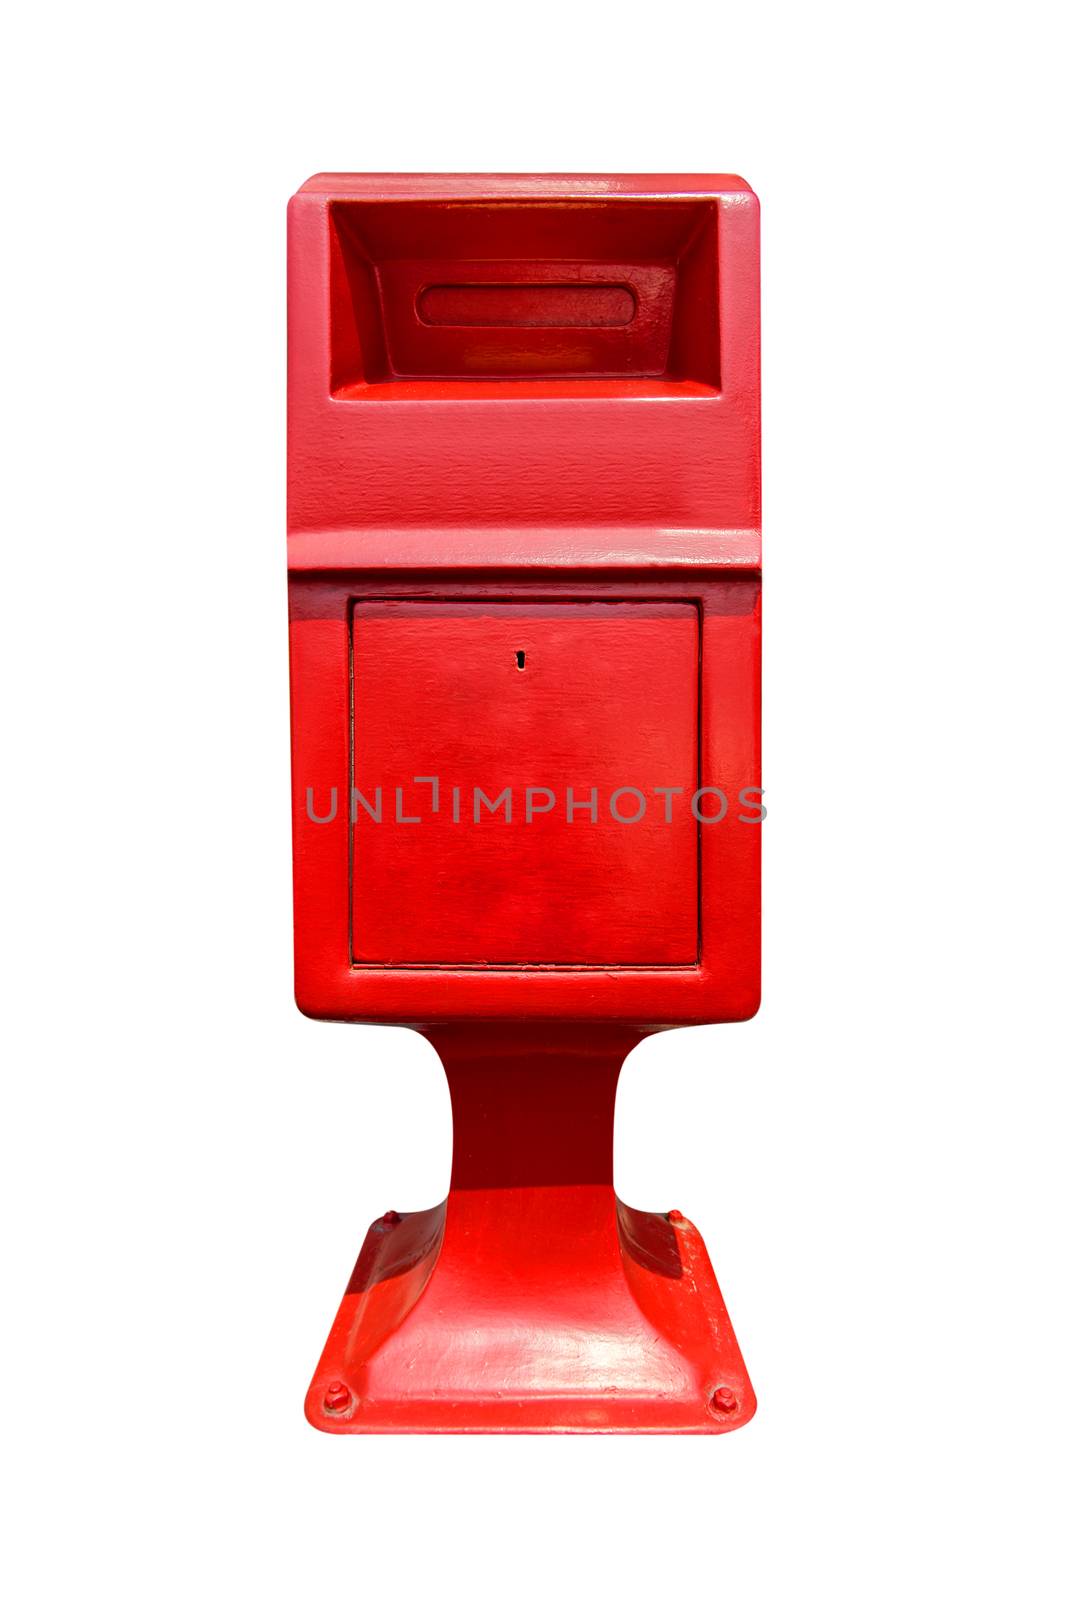 Red postbox isolated on white background.